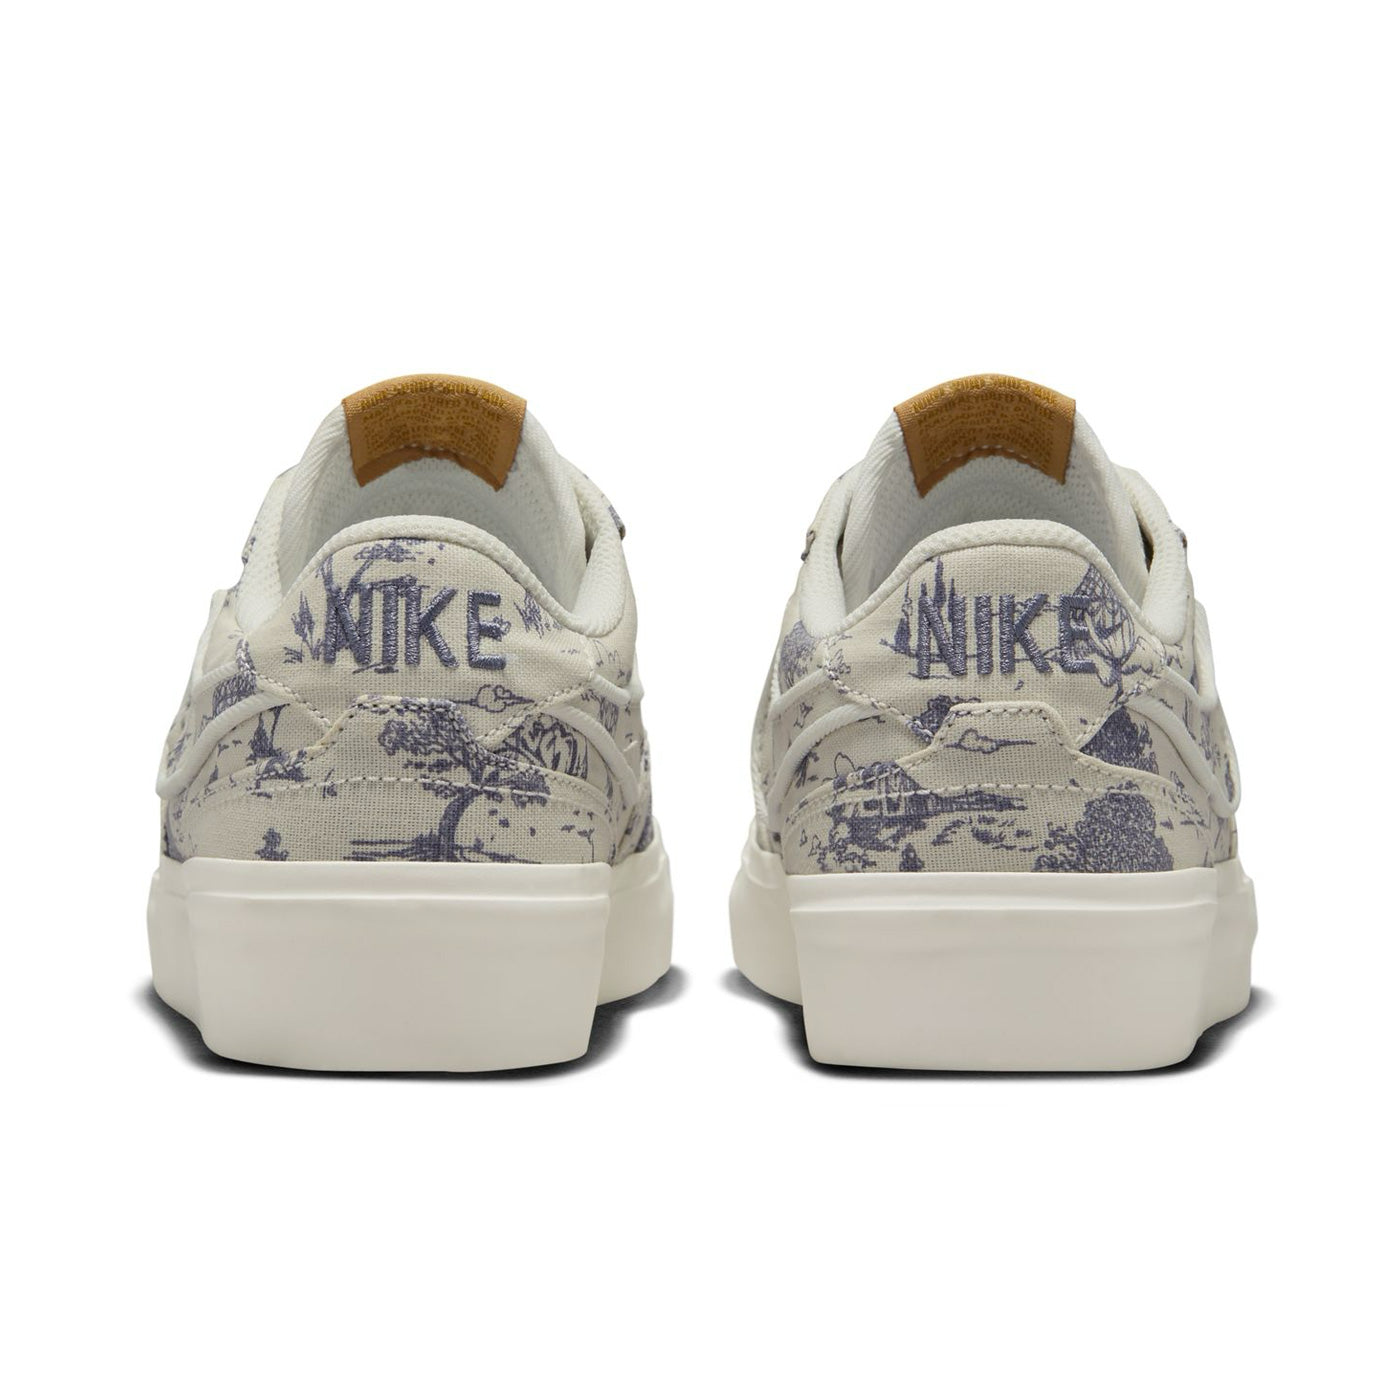 Cream nike sb pogo plus premium low top shoes with pastoral print, white midsole and brown nike sb tab on tongue. Free uk shipping over £50